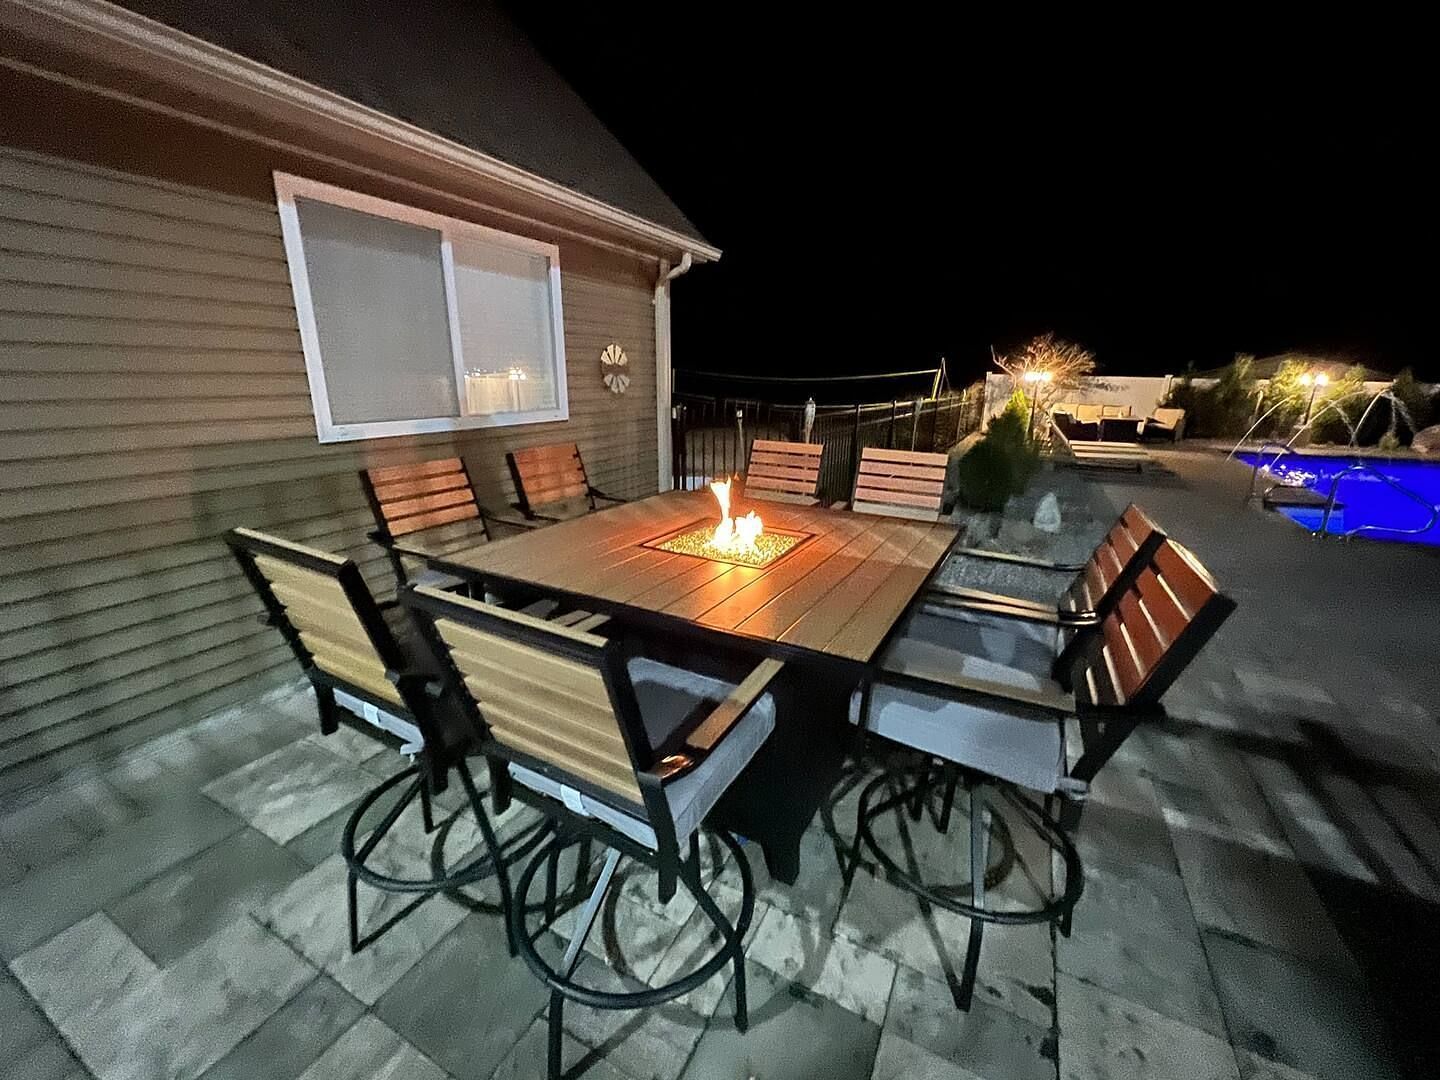 JWguest Villa at Wallkill, New York | Resort style house with pool - 5min from bethel | Jwbnb no brobnb 60